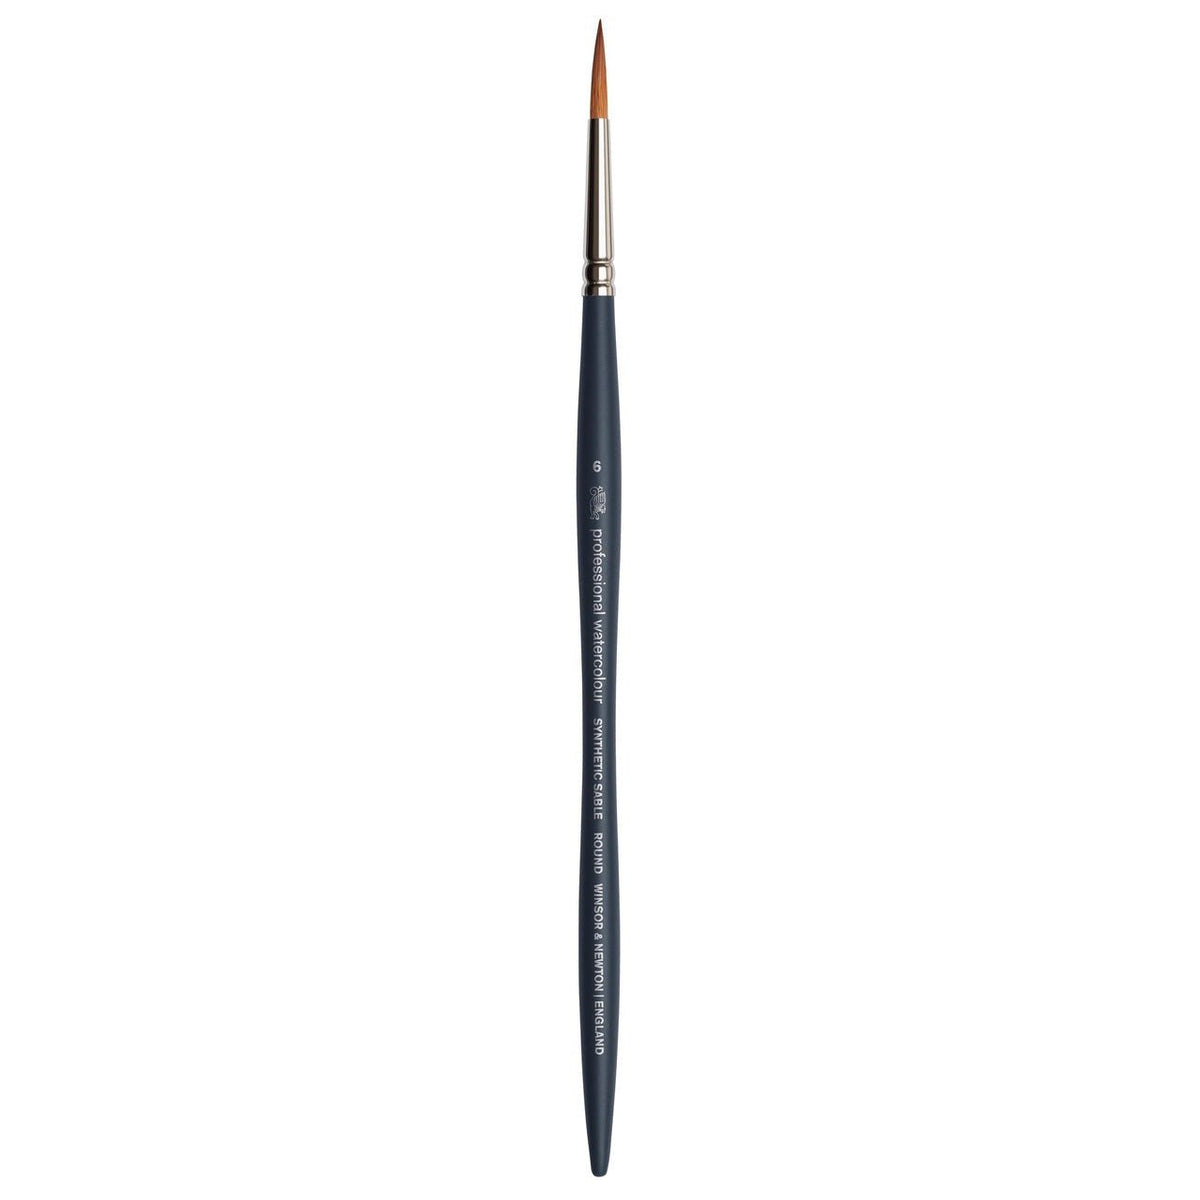 Winsor & Newton Professional Watercolor Synthetic Sable Brush - Round 6 - merriartist.com